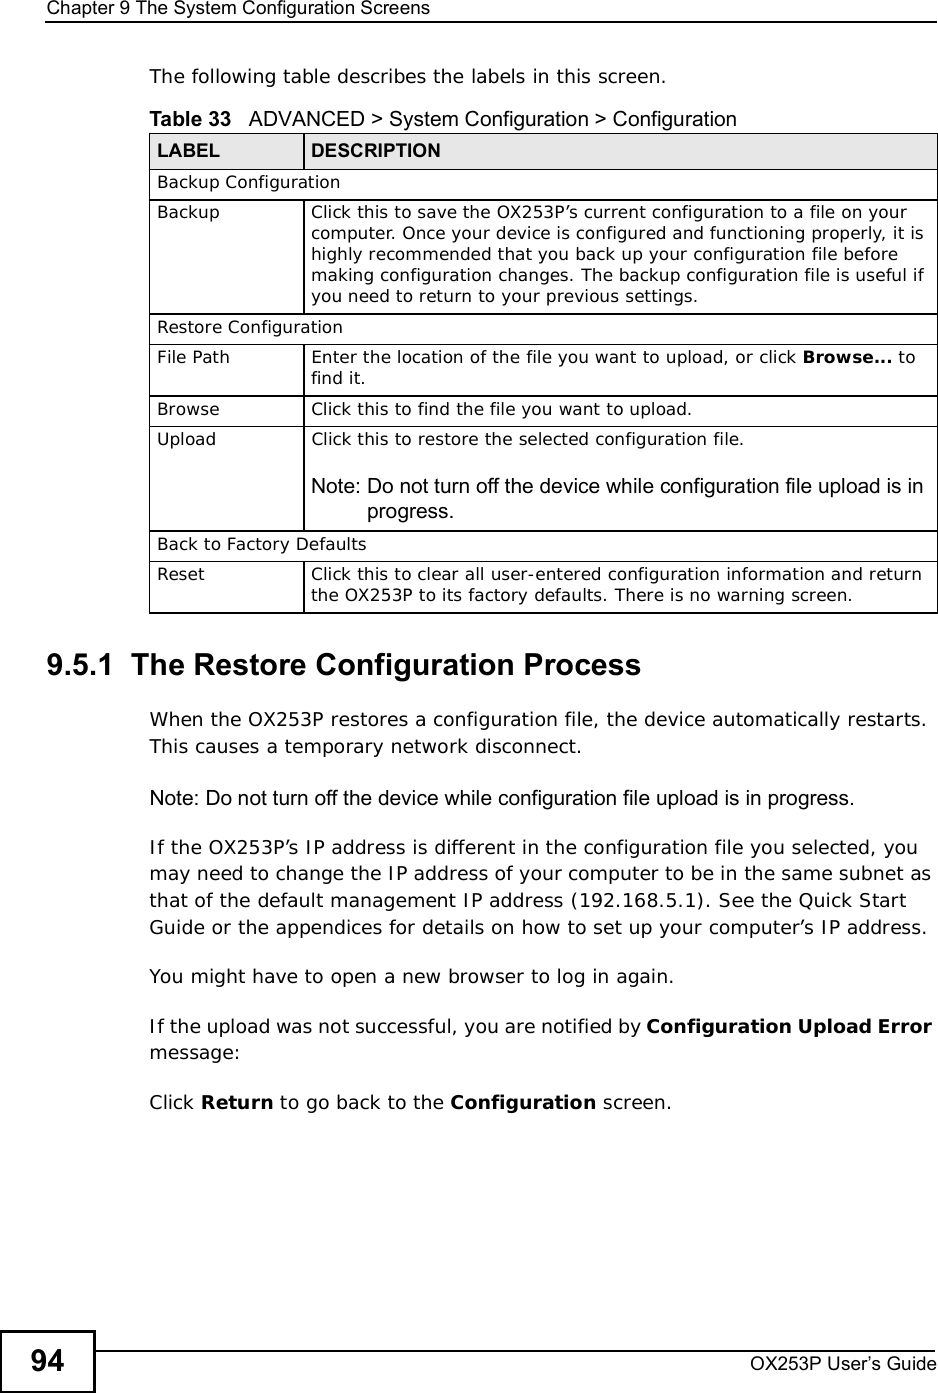 Chapter 9The System Configuration ScreensOX253P User’s Guide94The following table describes the labels in this screen.  9.5.1  The Restore Configuration ProcessWhen the OX253P restores a configuration file, the device automatically restarts. This causes a temporary network disconnect. Note: Do not turn off the device while configuration file upload is in progress.If the OX253P’s IP address is different in the configuration file you selected, you may need to change the IP address of your computer to be in the same subnet as that of the default management IP address (192.168.5.1). See the Quick Start Guide or the appendices for details on how to set up your computer’s IP address.You might have to open a new browser to log in again.If the upload was not successful, you are notified by Configuration Upload Errormessage:Click Return to go back to the Configuration screen.Table 33   ADVANCED &gt; System Configuration &gt; ConfigurationLABEL DESCRIPTIONBackup ConfigurationBackup Click this to save the OX253P’s current configuration to a file on your computer. Once your device is configured and functioning properly, it is highly recommended that you back up your configuration file before making configuration changes. The backup configuration file is useful if you need to return to your previous settings.Restore ConfigurationFile PathEnter the location of the file you want to upload, or click Browse... to find it.BrowseClick this to find the file you want to upload.UploadClick this to restore the selected configuration file.Note: Do not turn off the device while configuration file upload is in progress.Back to Factory DefaultsReset Click this to clear all user-entered configuration information and return the OX253P to its factory defaults. There is no warning screen.